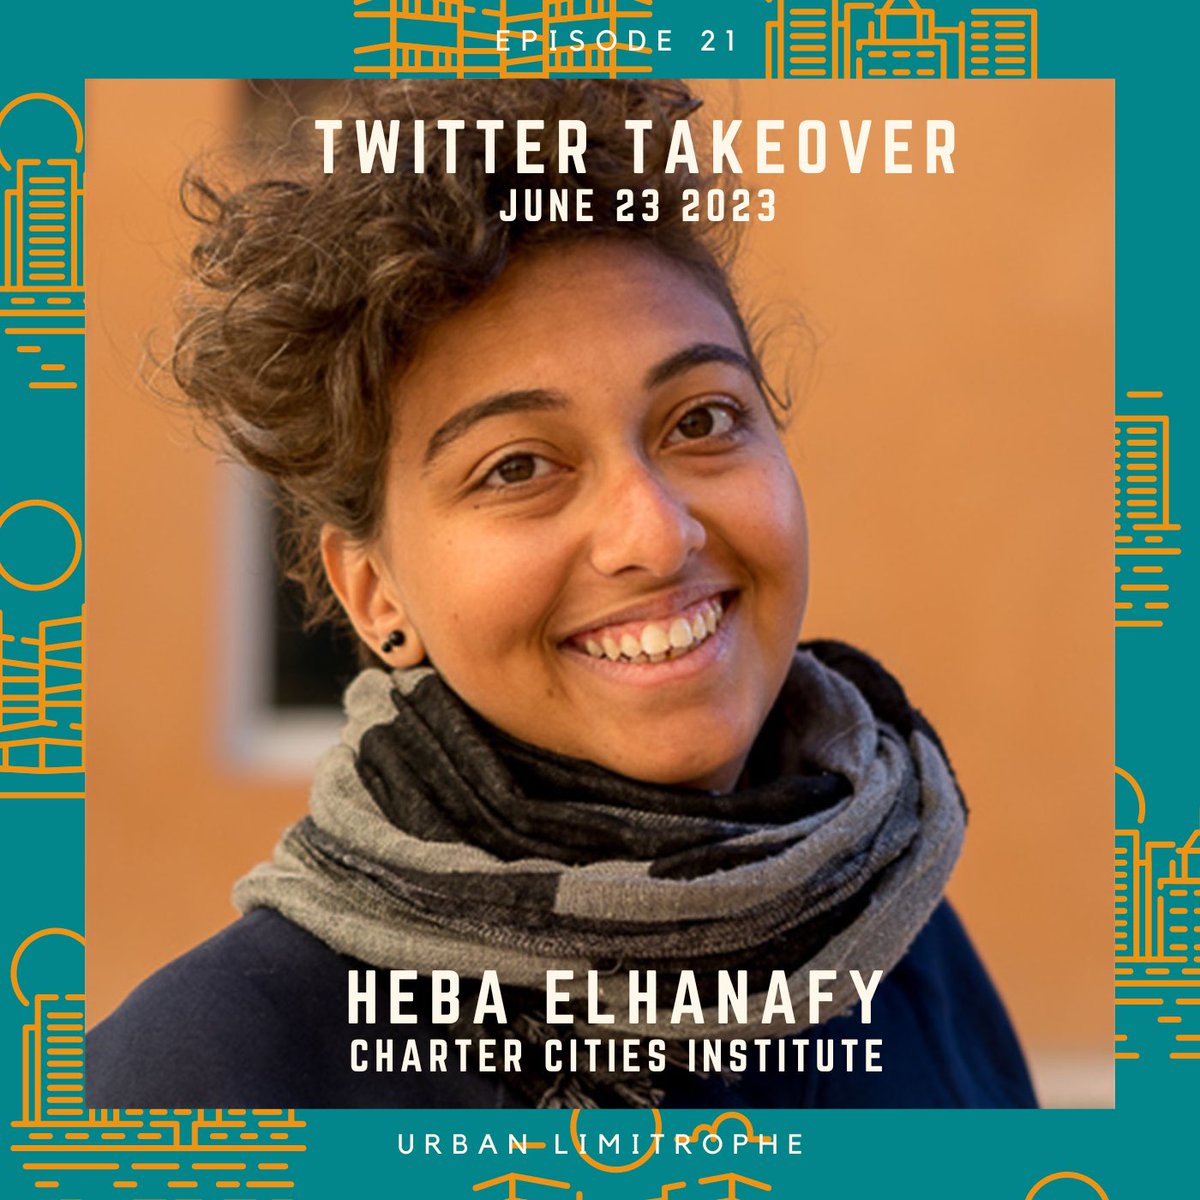 🎙️ Get ready for an exclusive takeover by @hebaelhanafi the guest of my latest episode! 🎧 Mark your calendars for June 23rd as she takes over the Twitter account! Discover her work enhancing walkability in the city at @CCIdotCity’s  Lusaka Urban Lab 🚶🏾‍♀️@geo_uoft @UofTCities